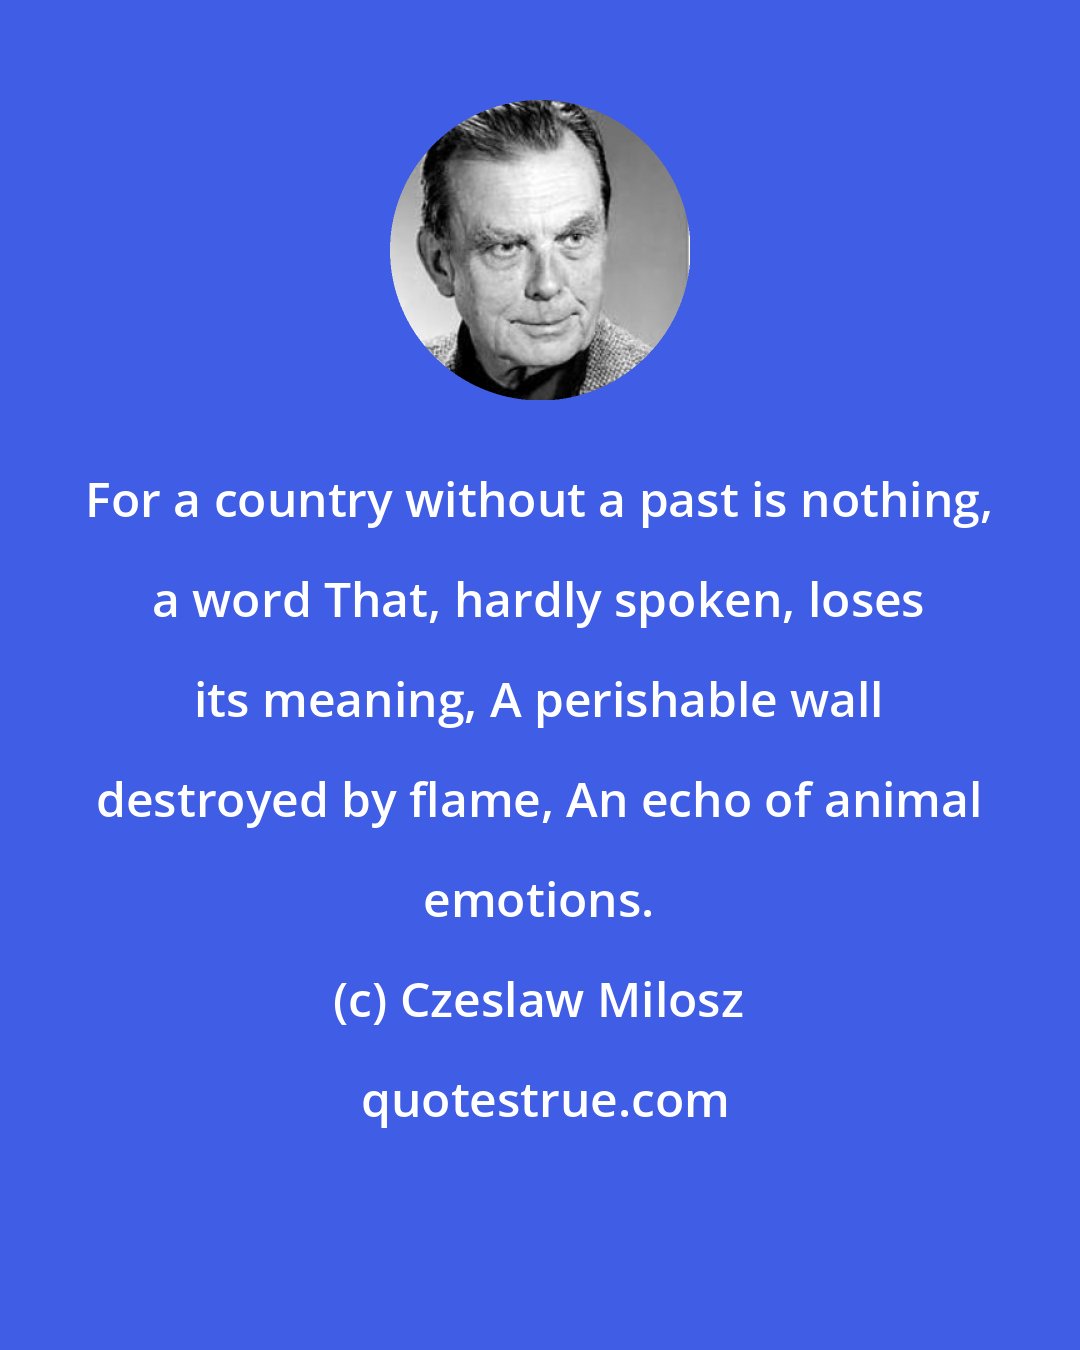 Czeslaw Milosz: For a country without a past is nothing, a word That, hardly spoken, loses its meaning, A perishable wall destroyed by flame, An echo of animal emotions.